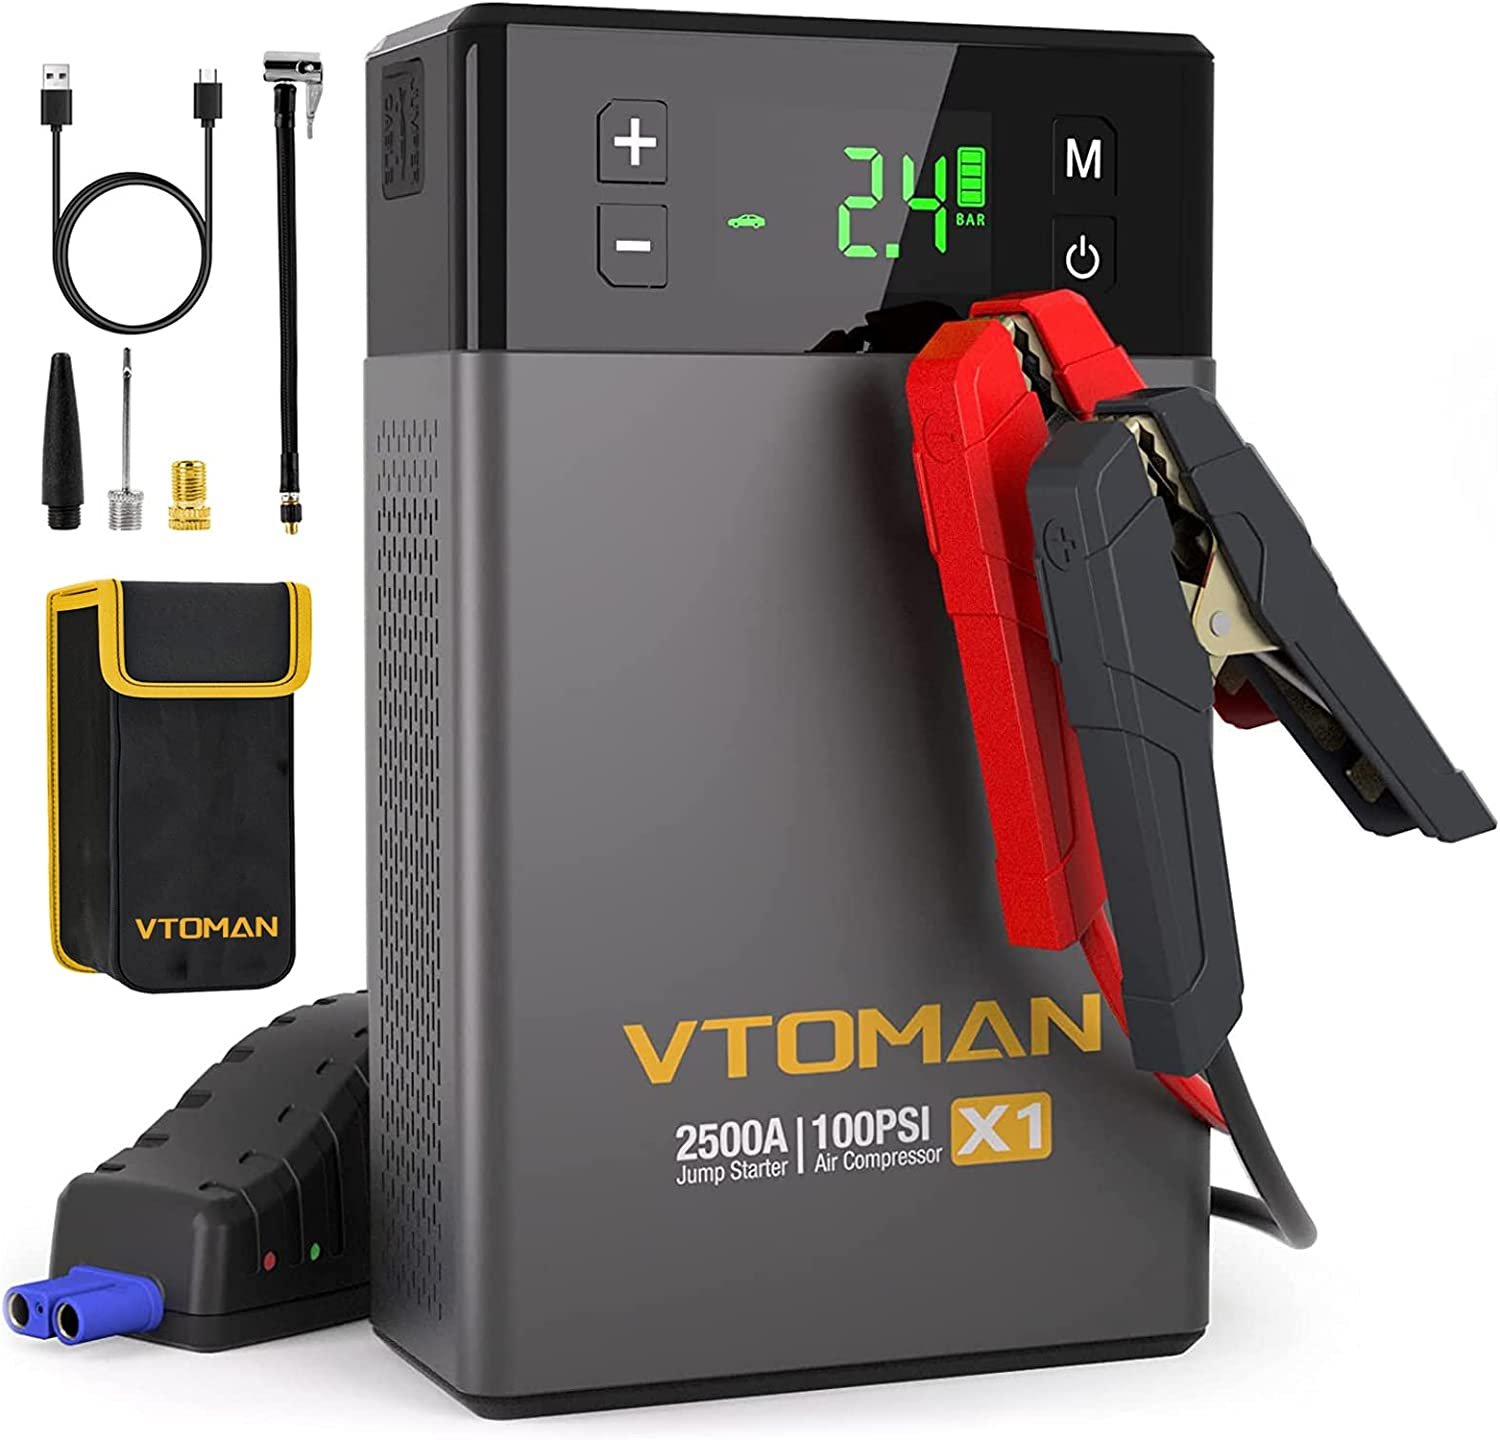 VTOMAN X1 Jump Starter with Air Compressor, 2500A Battery Starter with 100PSI Digital Tire Inflator